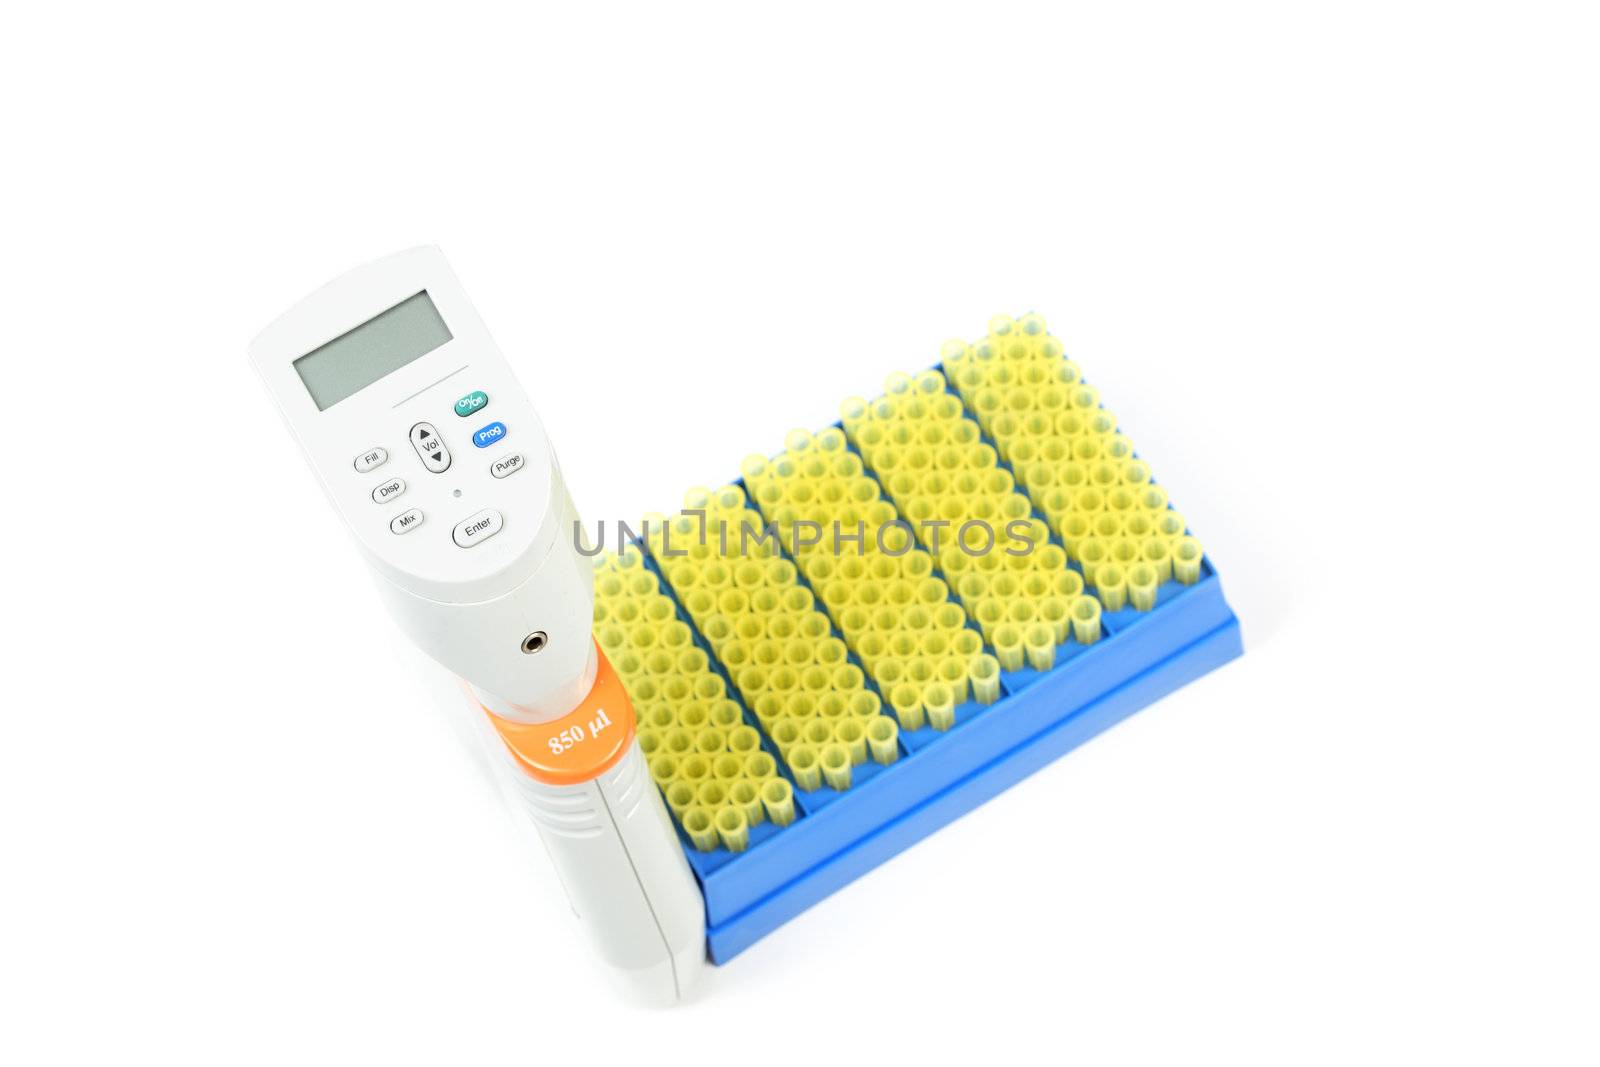 Electronic multi channel pipettor and rack of pipette tips.  Used for research and analysis in the medical and scientific industries.